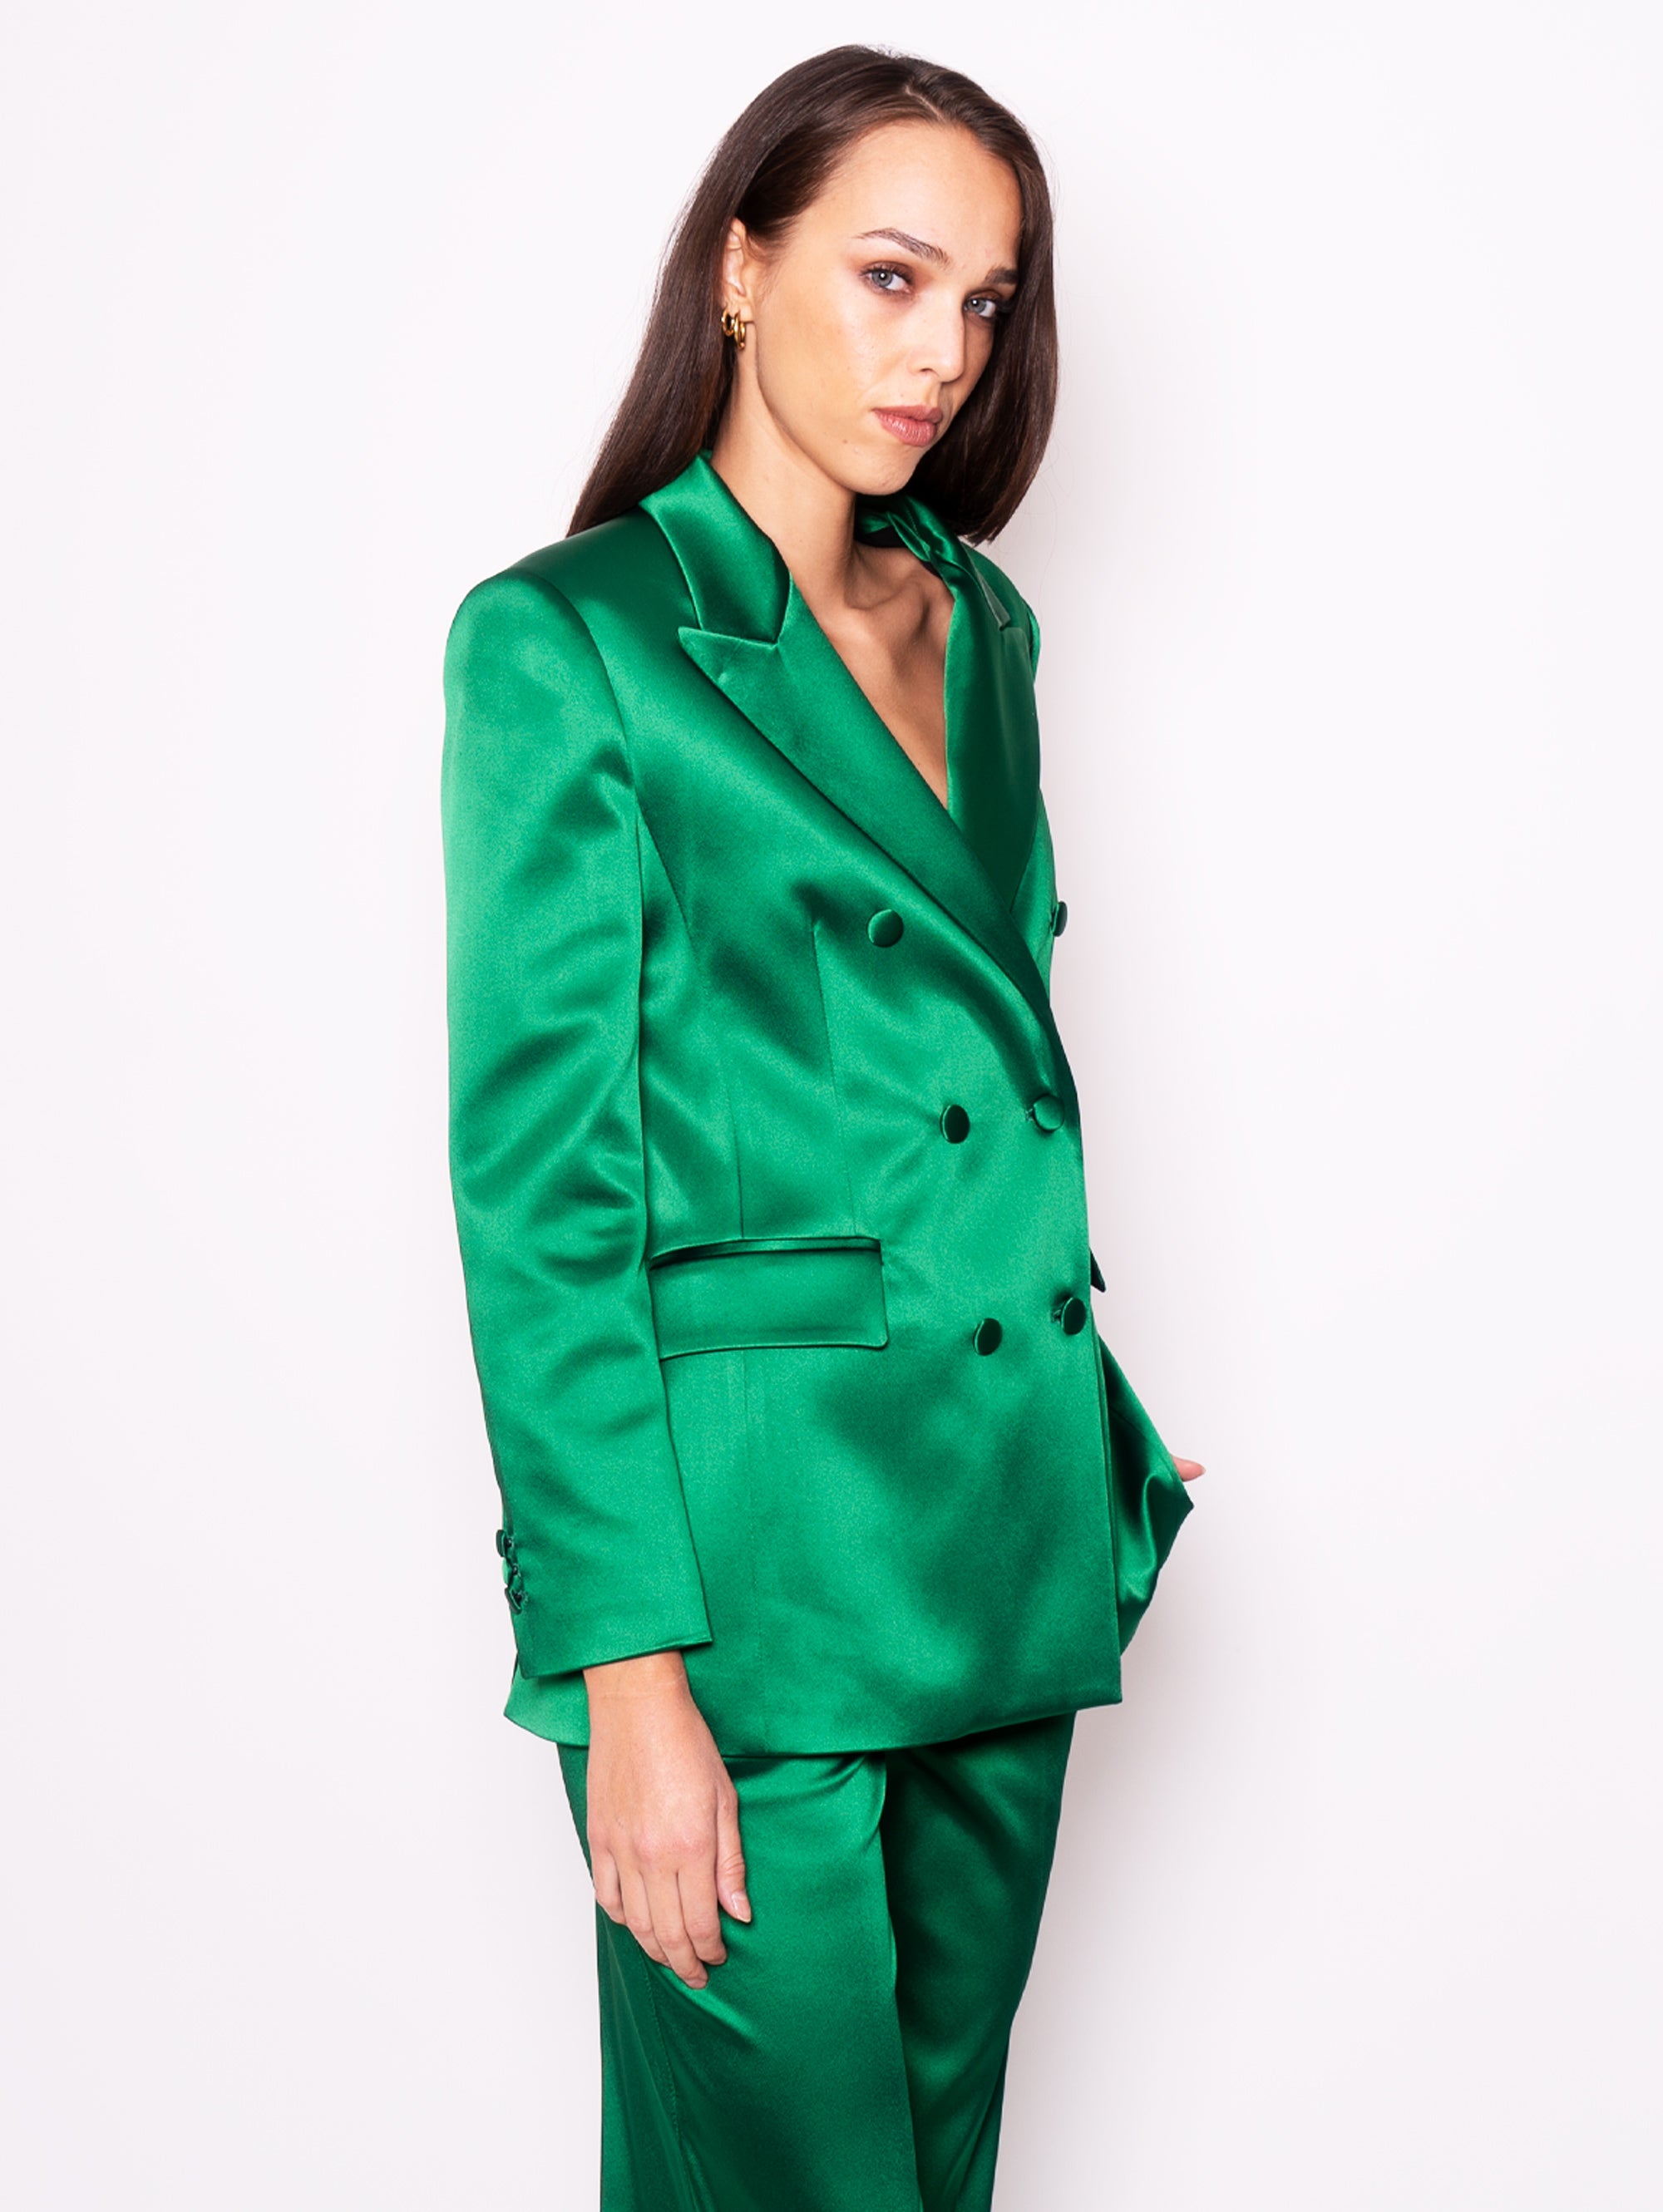 Double Breasted Jacket in Green Satin